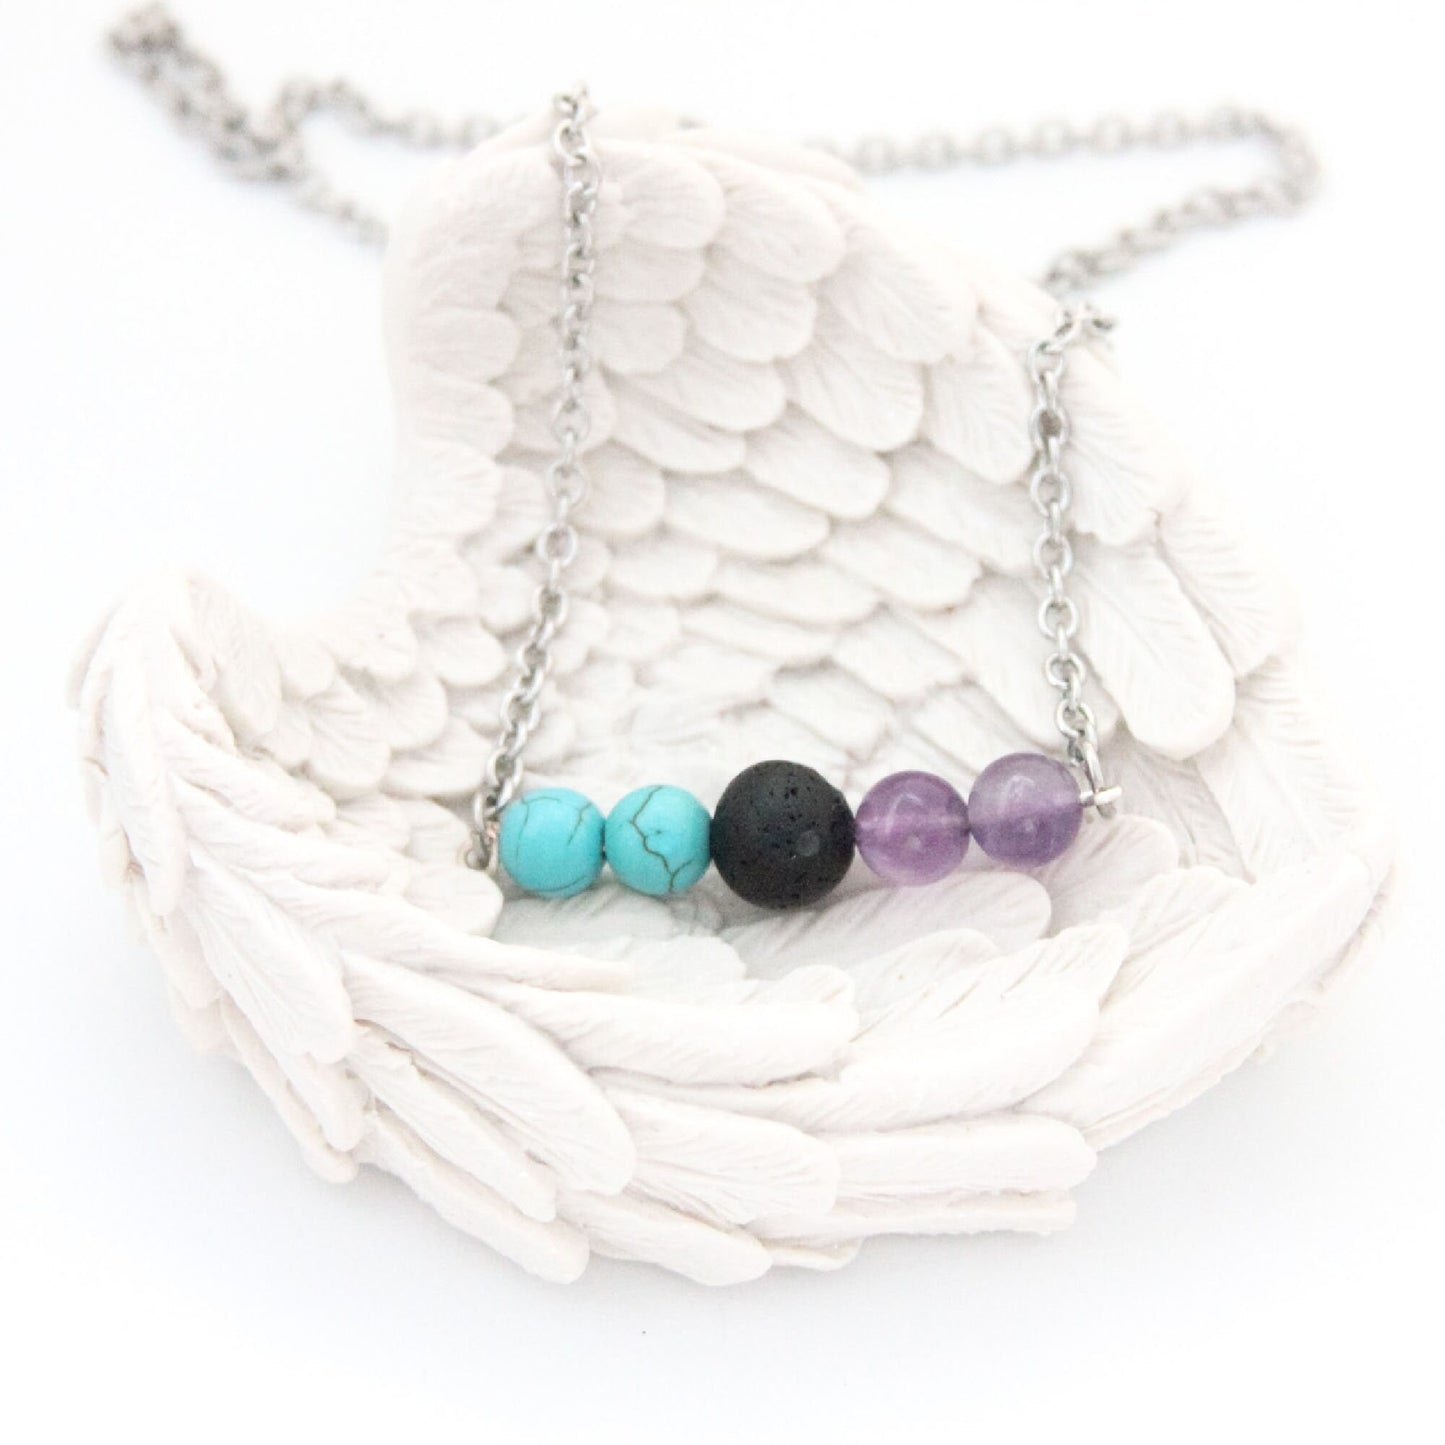 Suicide Awareness Diffuser Necklace with Amethyst & Turquoise Howlite